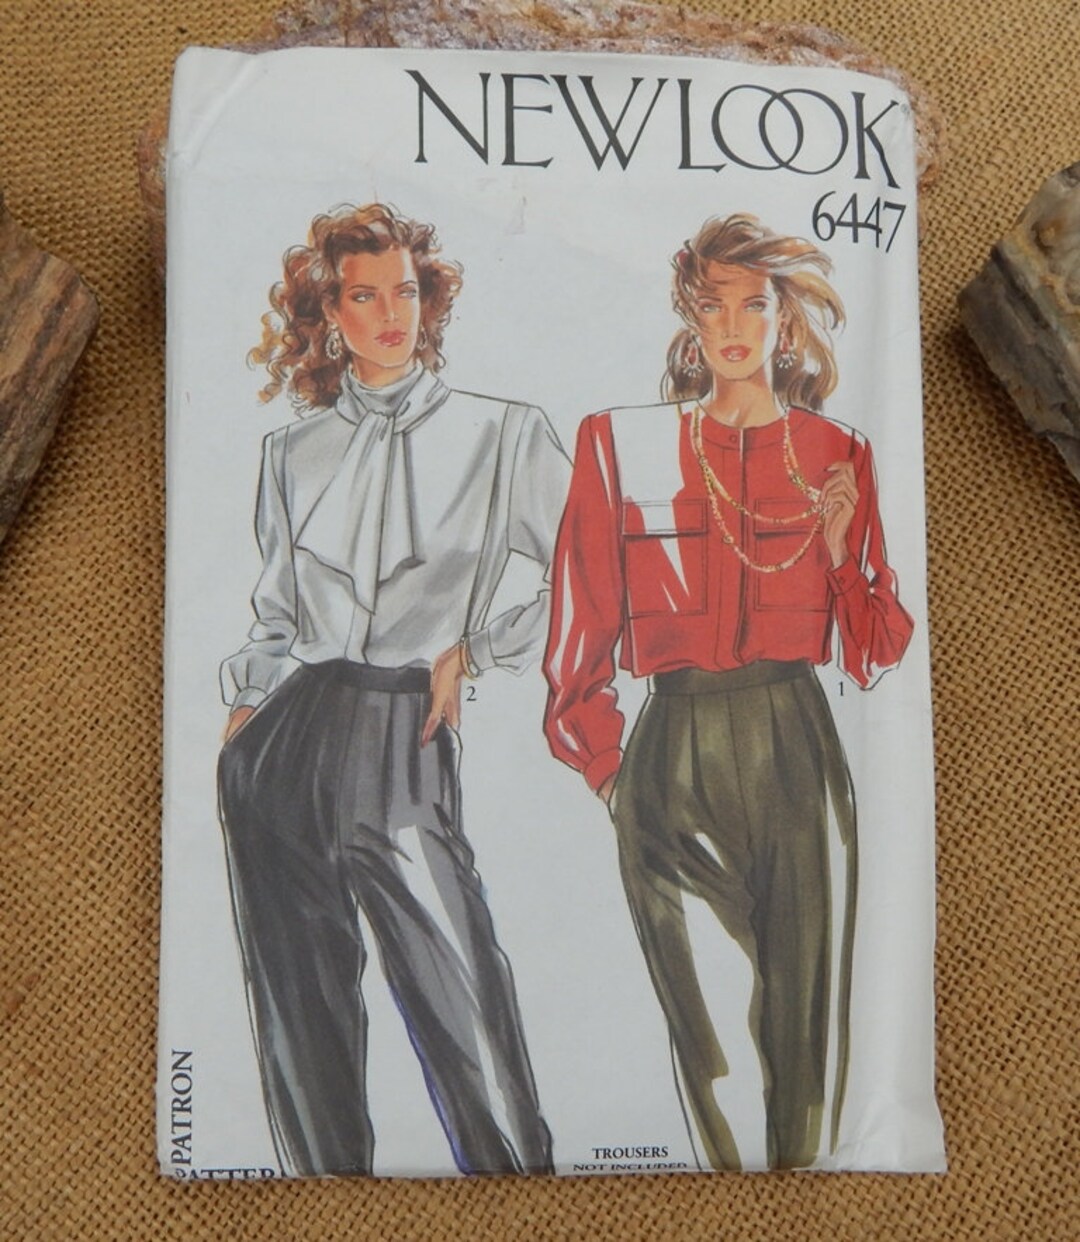 New Look 6447 / New Look Blouse Pattern Size 8-10-12-14-16-18 / New ...